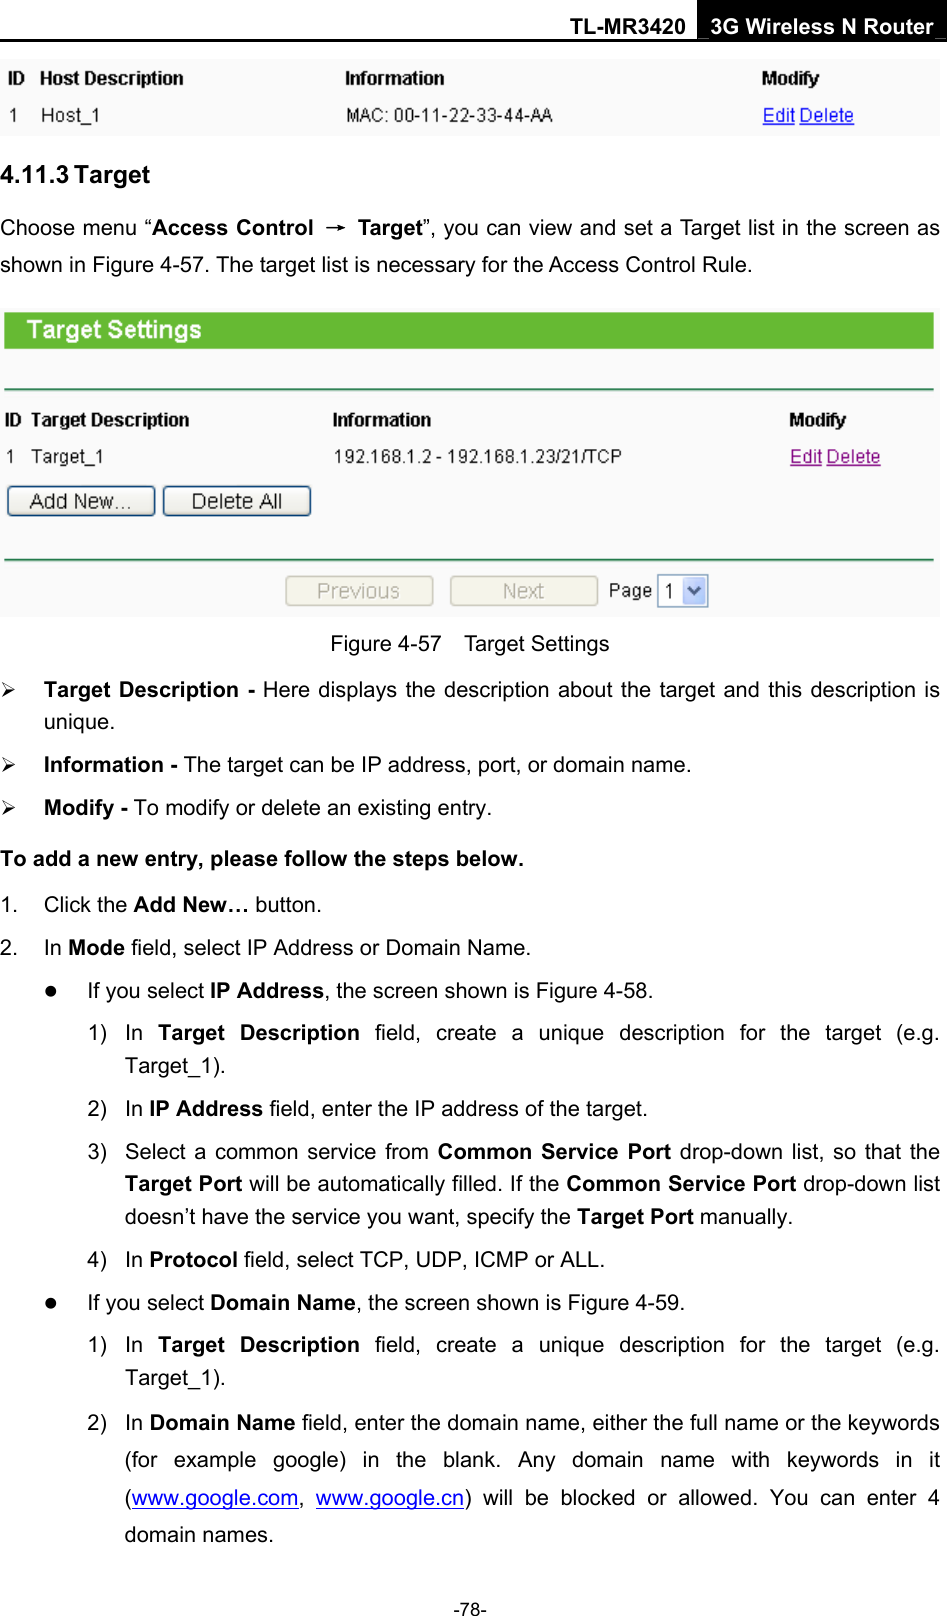 TL-MR3420 3G Wireless N Router -78-  4.11.3 Target Choose menu “Access Control  → Target”, you can view and set a Target list in the screen as shown in Figure 4-57. The target list is necessary for the Access Control Rule.  Figure 4-57  Target Settings ¾ Target Description - Here displays the description about the target and this description is unique.  ¾ Information - The target can be IP address, port, or domain name.   ¾ Modify - To modify or delete an existing entry.   To add a new entry, please follow the steps below. 1. Click the Add New… button. 2. In Mode field, select IP Address or Domain Name. z If you select IP Address, the screen shown is Figure 4-58.   1) In Target Description field, create a unique description for the target (e.g. Target_1). 2) In IP Address field, enter the IP address of the target. 3)  Select a common service from Common Service Port drop-down list, so that the Target Port will be automatically filled. If the Common Service Port drop-down list doesn’t have the service you want, specify the Target Port manually. 4) In Protocol field, select TCP, UDP, ICMP or ALL.  z If you select Domain Name, the screen shown is Figure 4-59. 1) In Target Description field, create a unique description for the target (e.g. Target_1). 2) In Domain Name field, enter the domain name, either the full name or the keywords (for example google) in the blank. Any domain name with keywords in it (www.google.com,  www.google.cn) will be blocked or allowed. You can enter 4 domain names. 